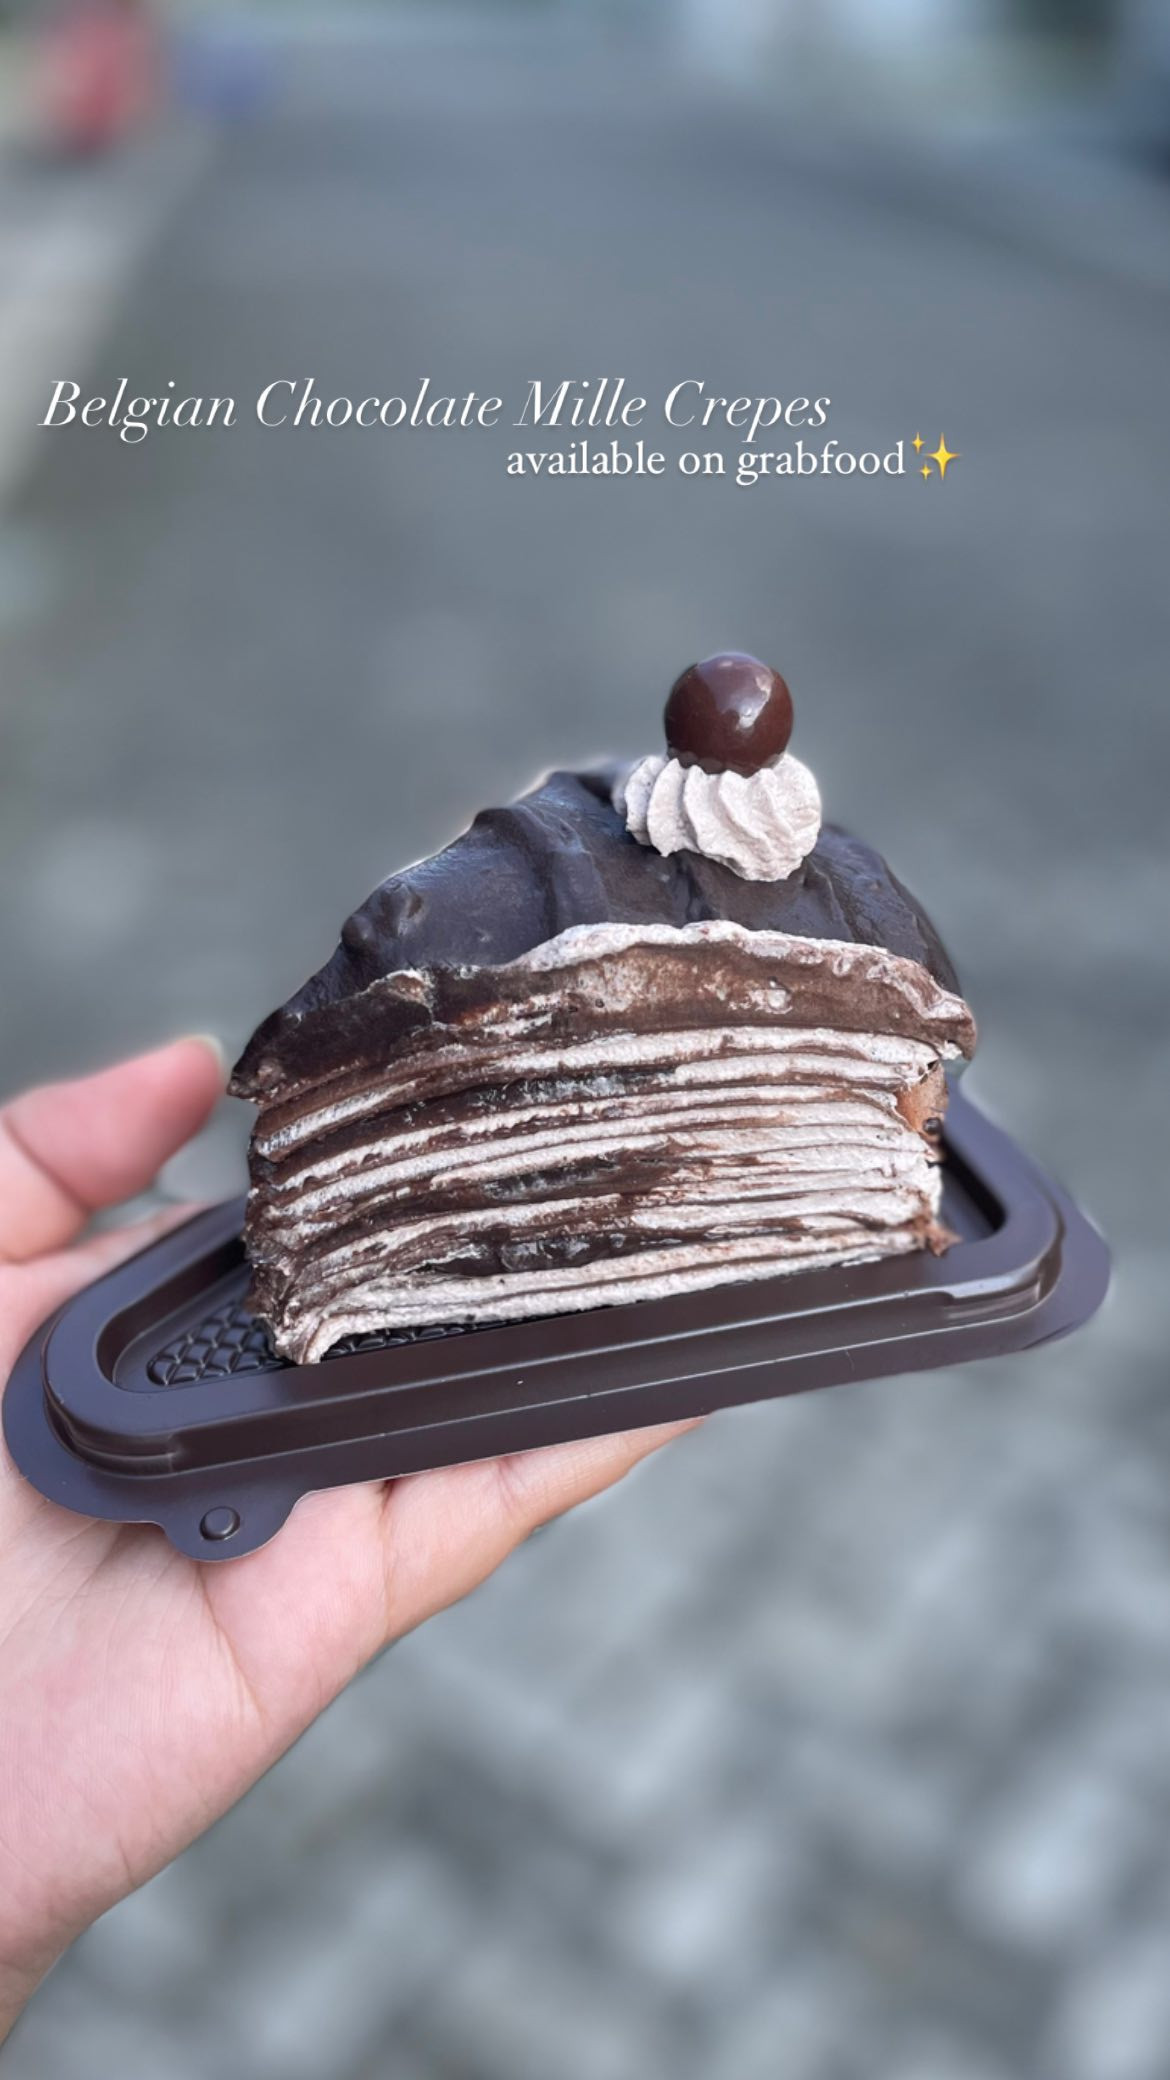 Belgian Chocolate Mille Crepes